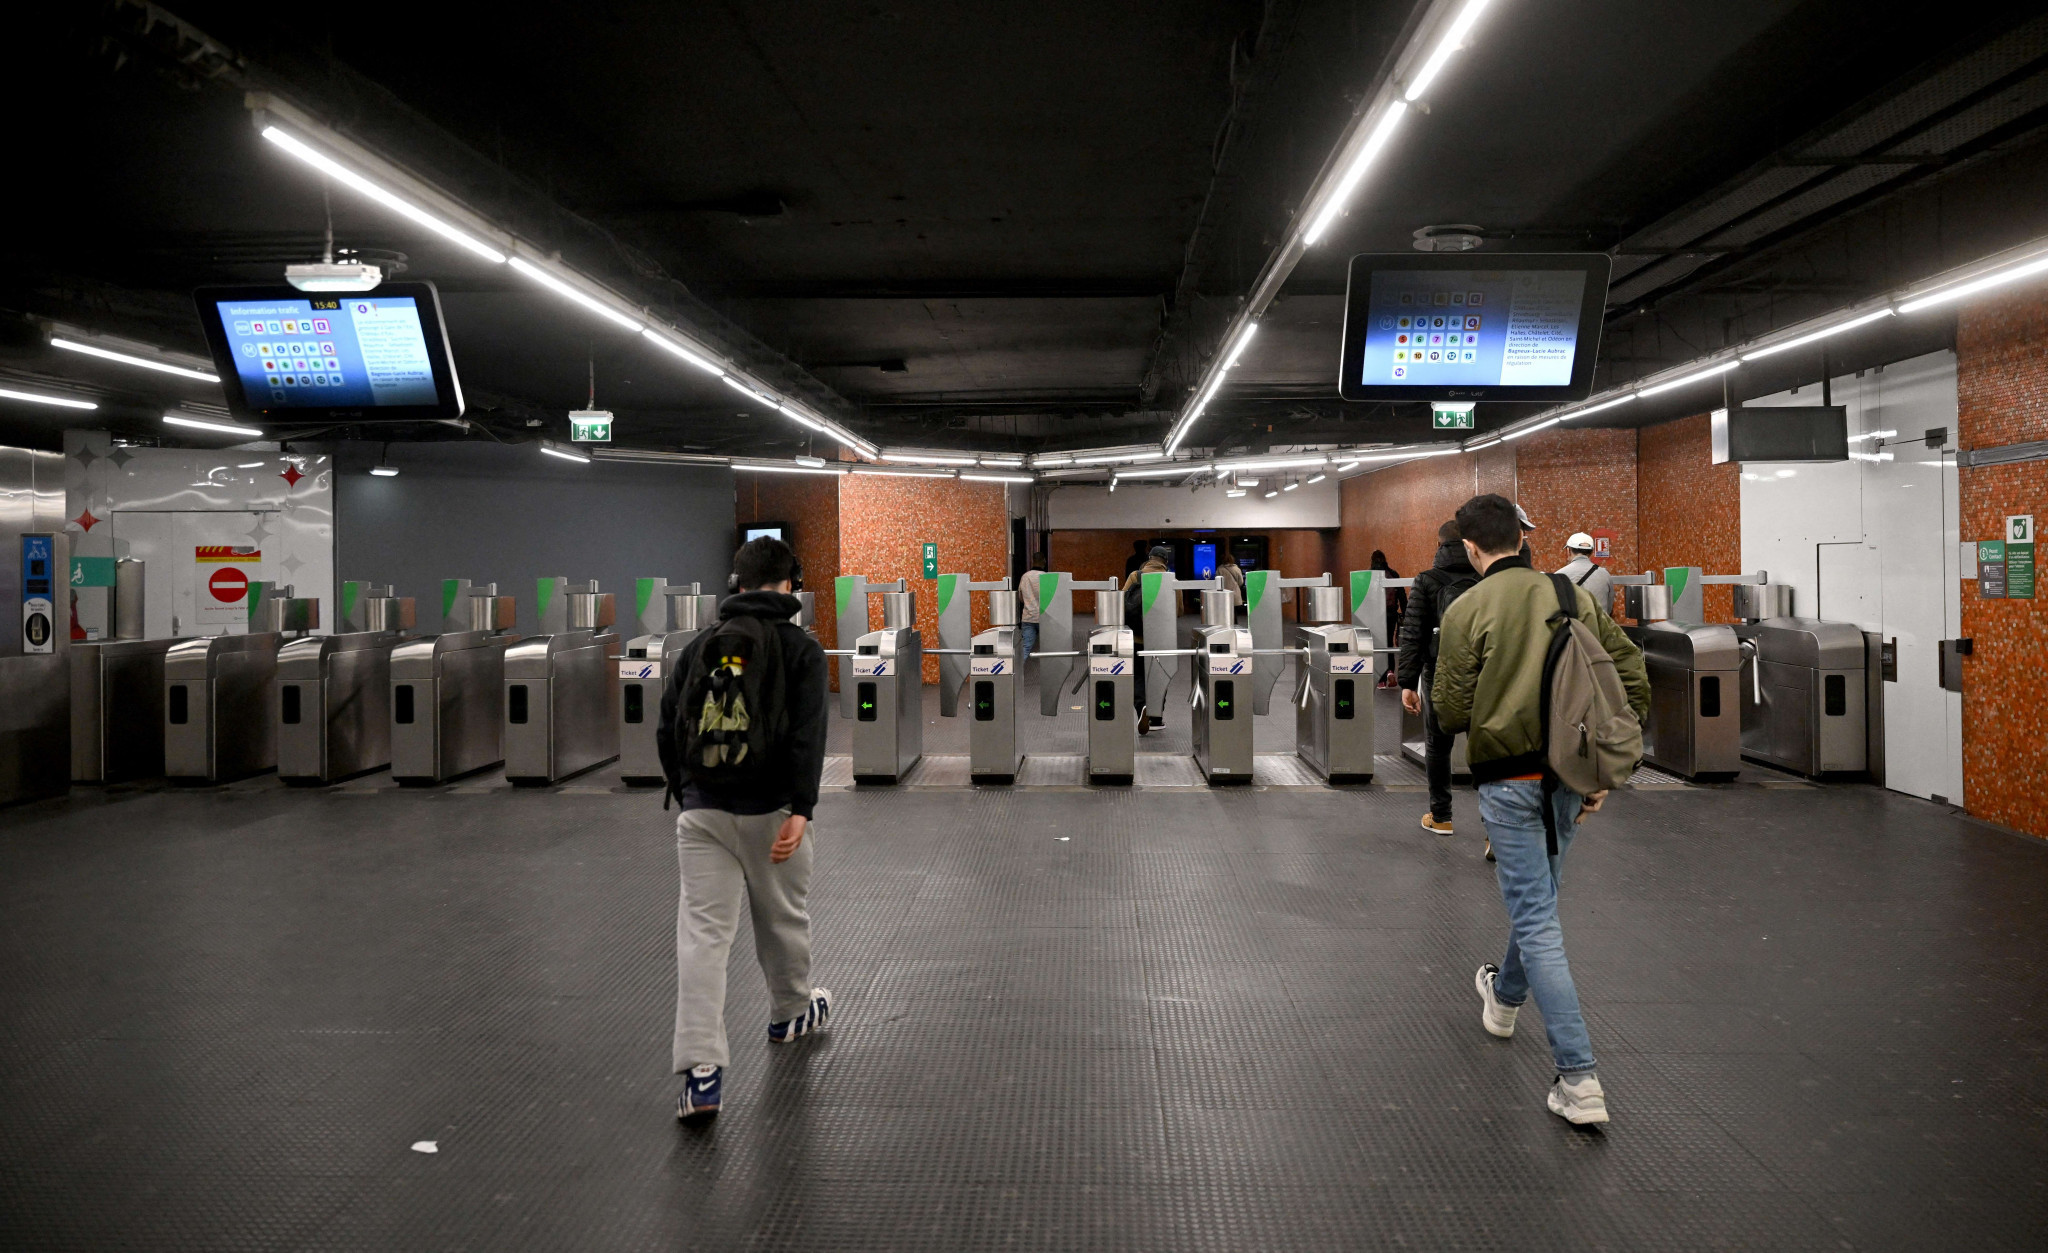 In total 100 new TVMs are set to be installed across public transport services in Paris ©Getty Images